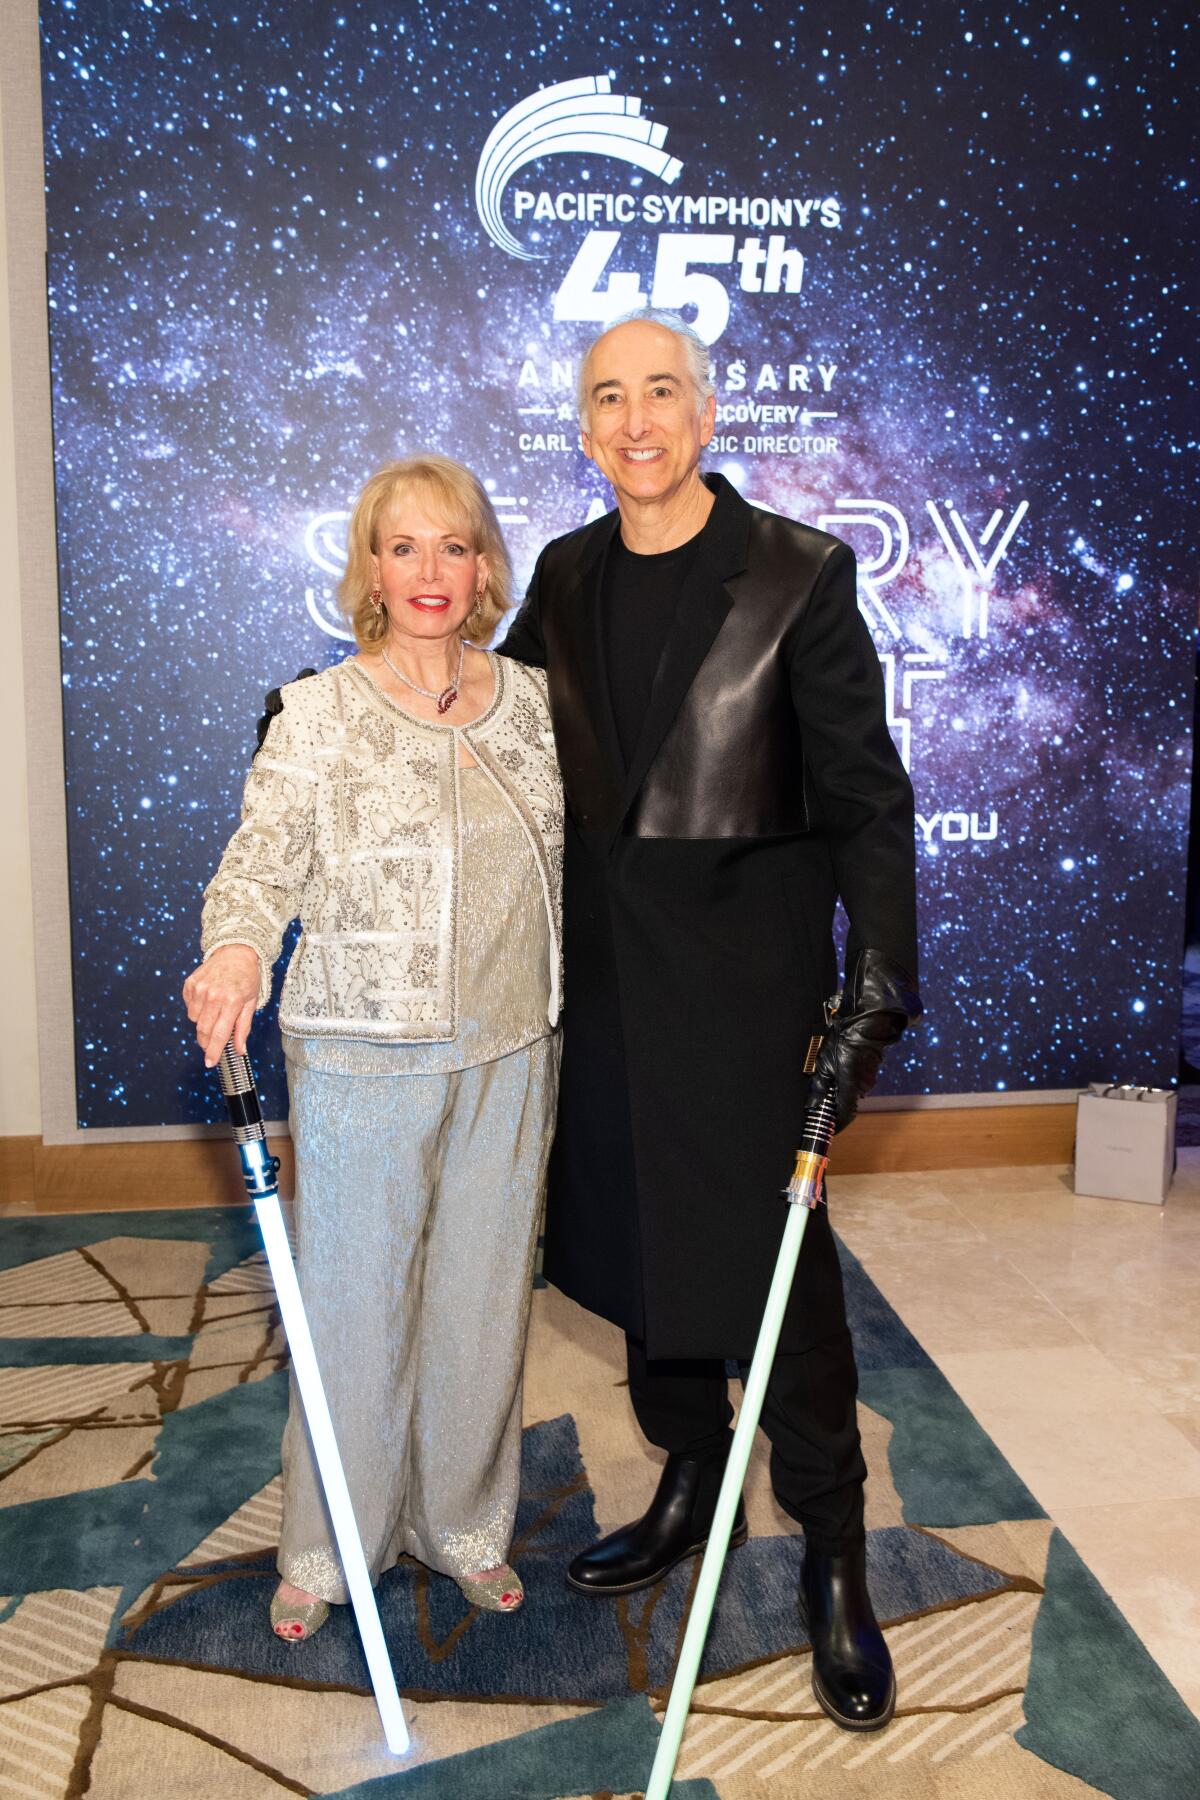 Judy Whitmore and Scott Seigel were co-chairs of the Pacific Symphony's 45th anniversary gala.